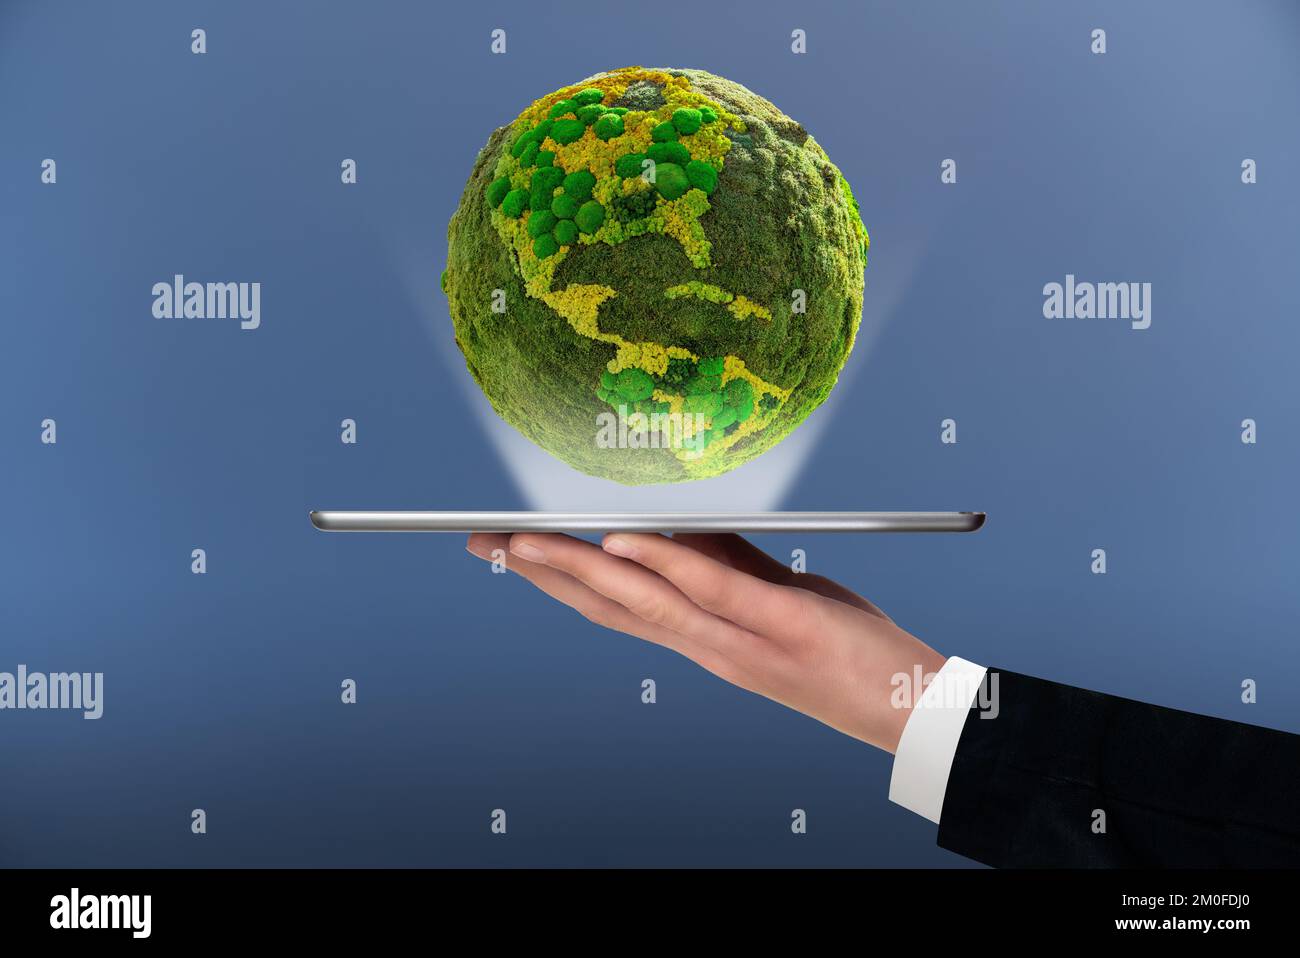 A man is holding a digital tablet. Above this green planet Earth. Symbol of sustainable development and renewable energy Stock Photo